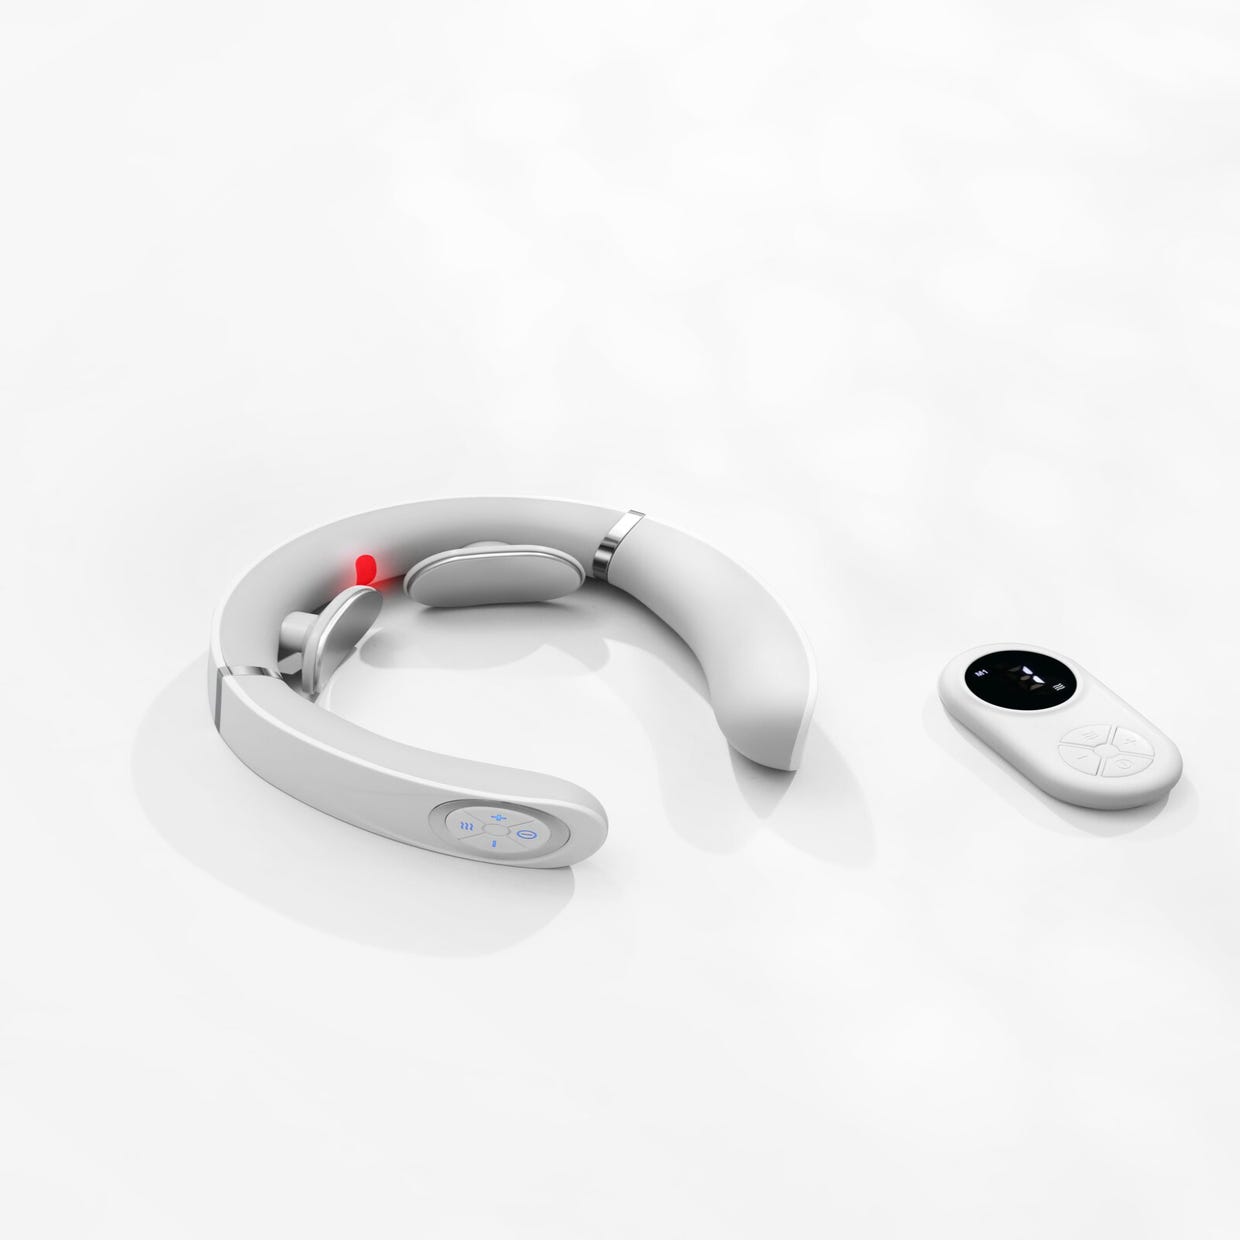 A heated neck massager with an ergonomic, U-shaped design is shown alongside its remote control, both in a minimalist white and silver color scheme.